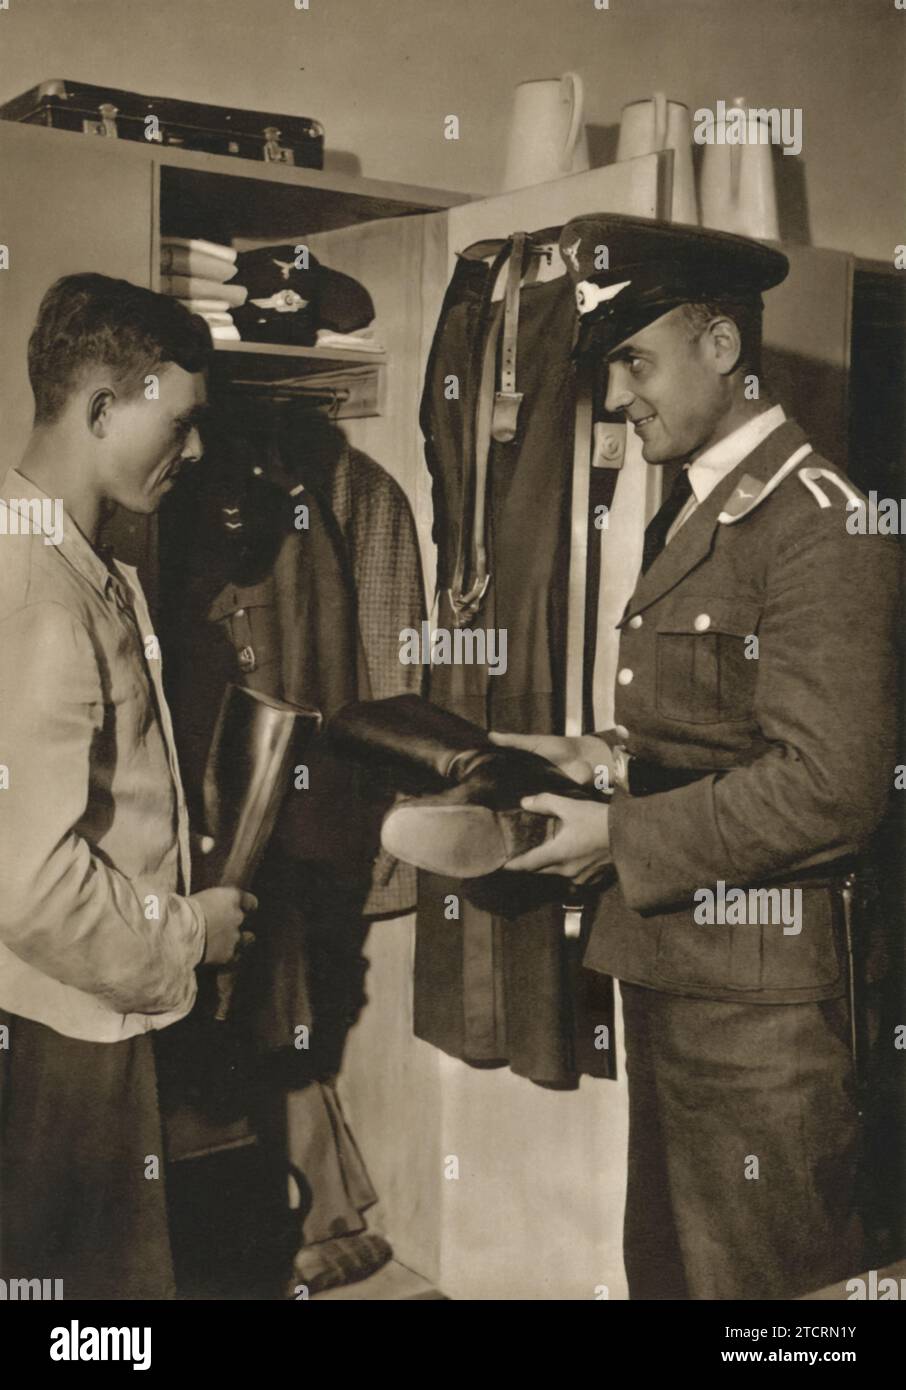 In the photograph, a German officer is seen conducting an inspection of a locker, likely belonging to a recruit in the Luftwaffe, the German Air Force. This practice of locker inspections was a routine yet vital aspect of military life, serving to reinforce discipline and order among the ranks. In the Luftwaffe, where precision and meticulousness were particularly valued, such inspections ensured that personal and issued equipment were kept in optimal condition and ready for use. Stock Photo